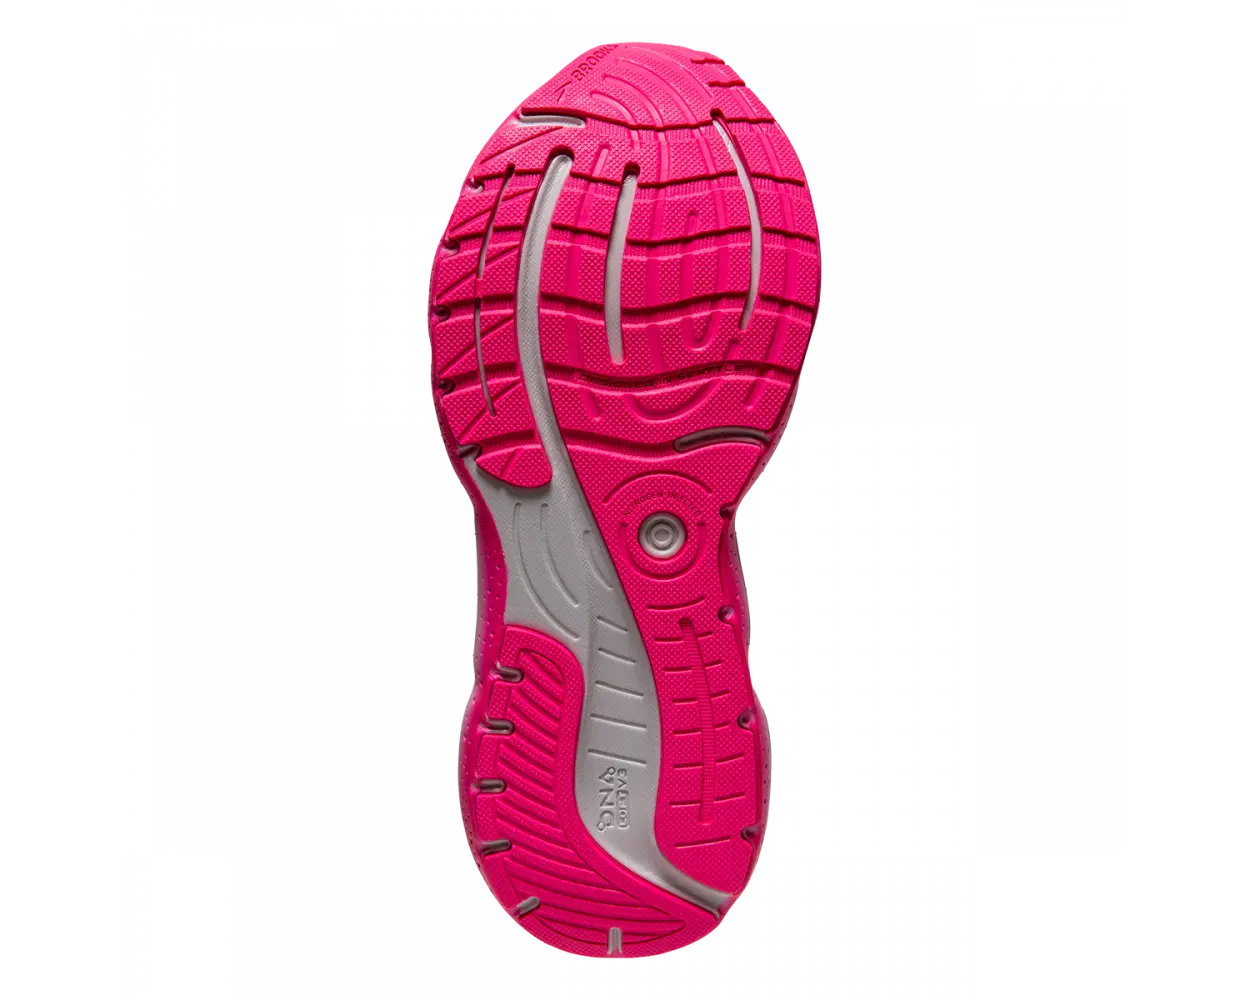 Bottom (outer sole) view of the Women's Glycerin Stealthfit 20 in the color Grey/Yellow/Pink